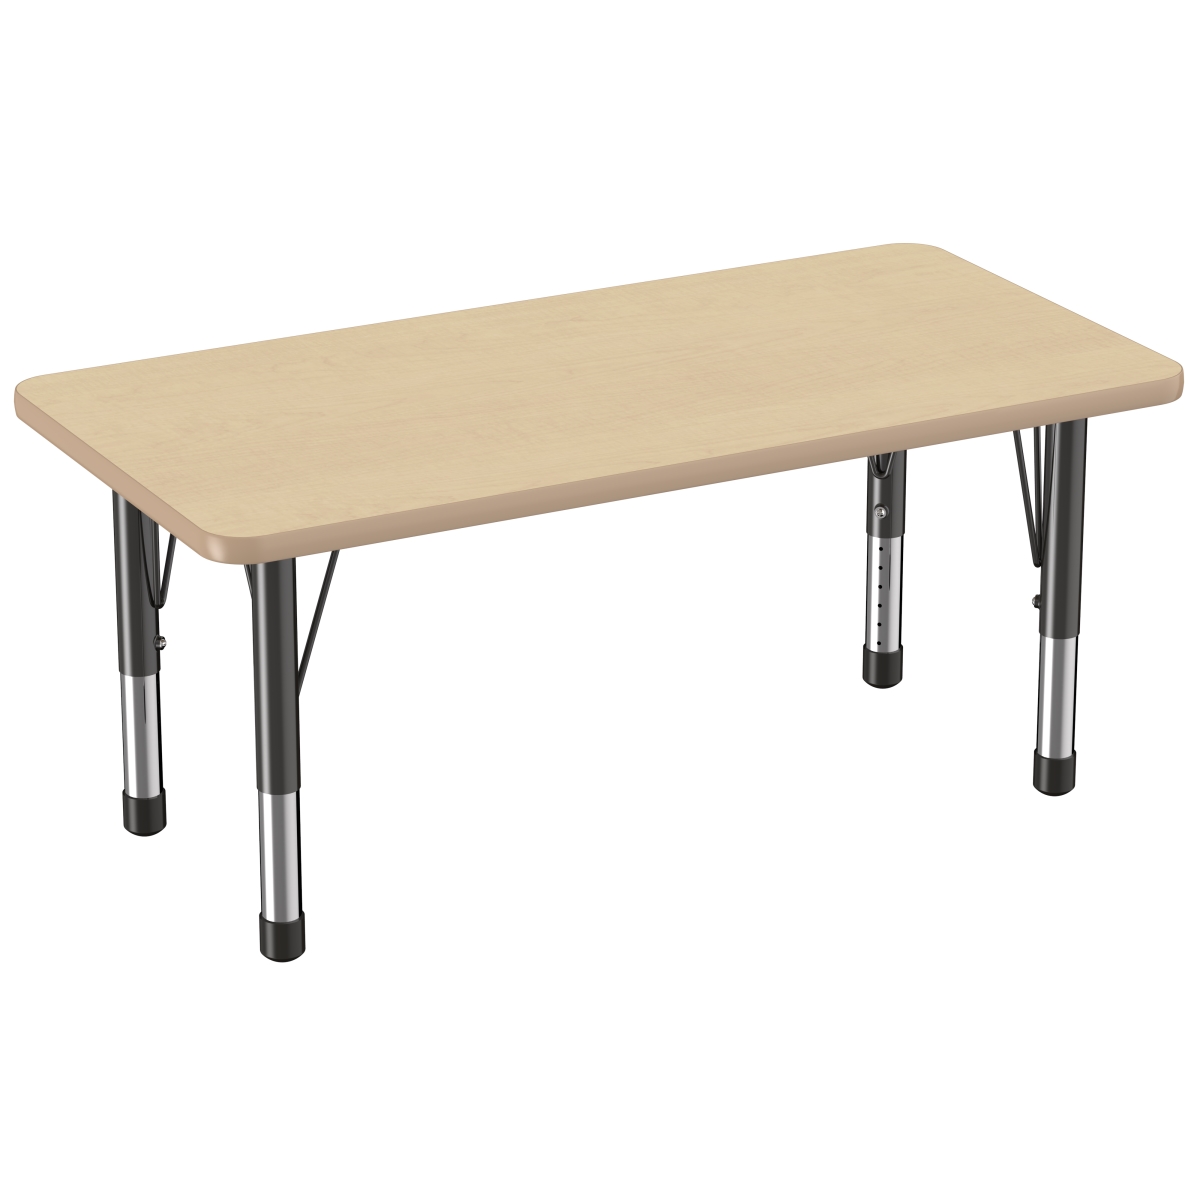 10009-mpmp 24 X 48 In. Rectangle T-mold Adjustable Activity Table With Chunky Leg - Maple